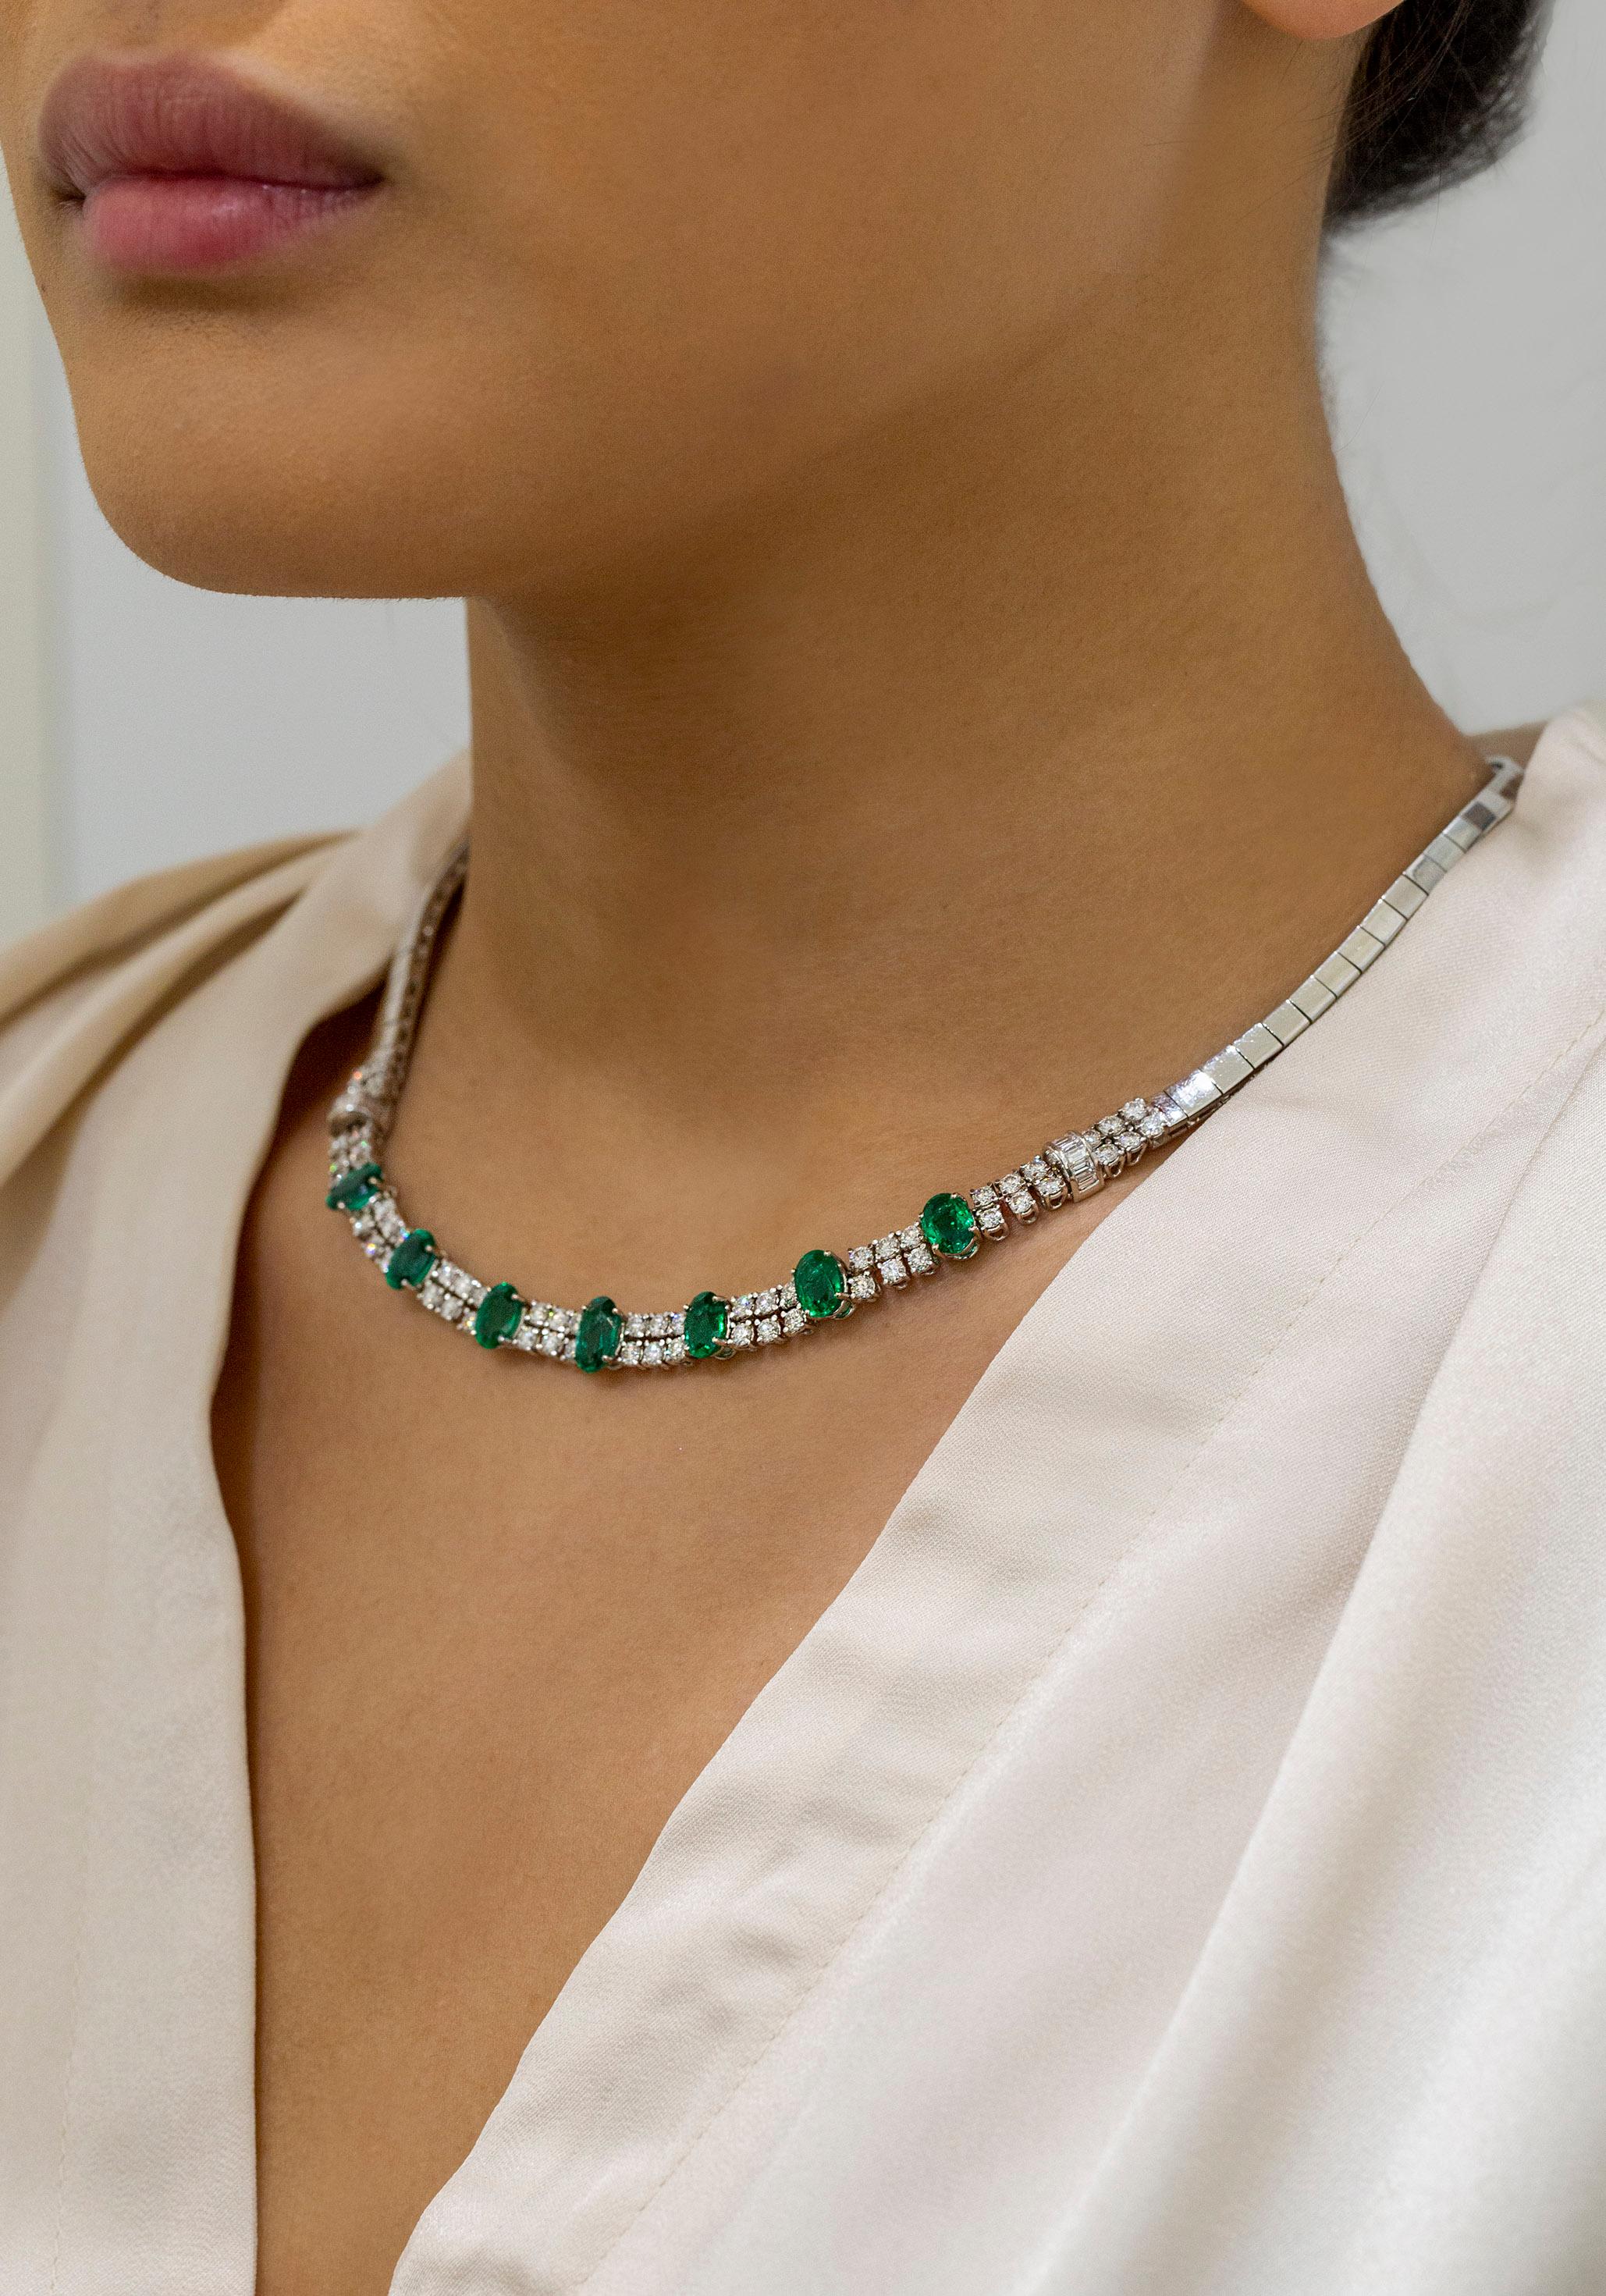 Roman Malakov 9.70 Carat Total, Oval Cut Green Emerald and Diamond Necklace In New Condition For Sale In New York, NY